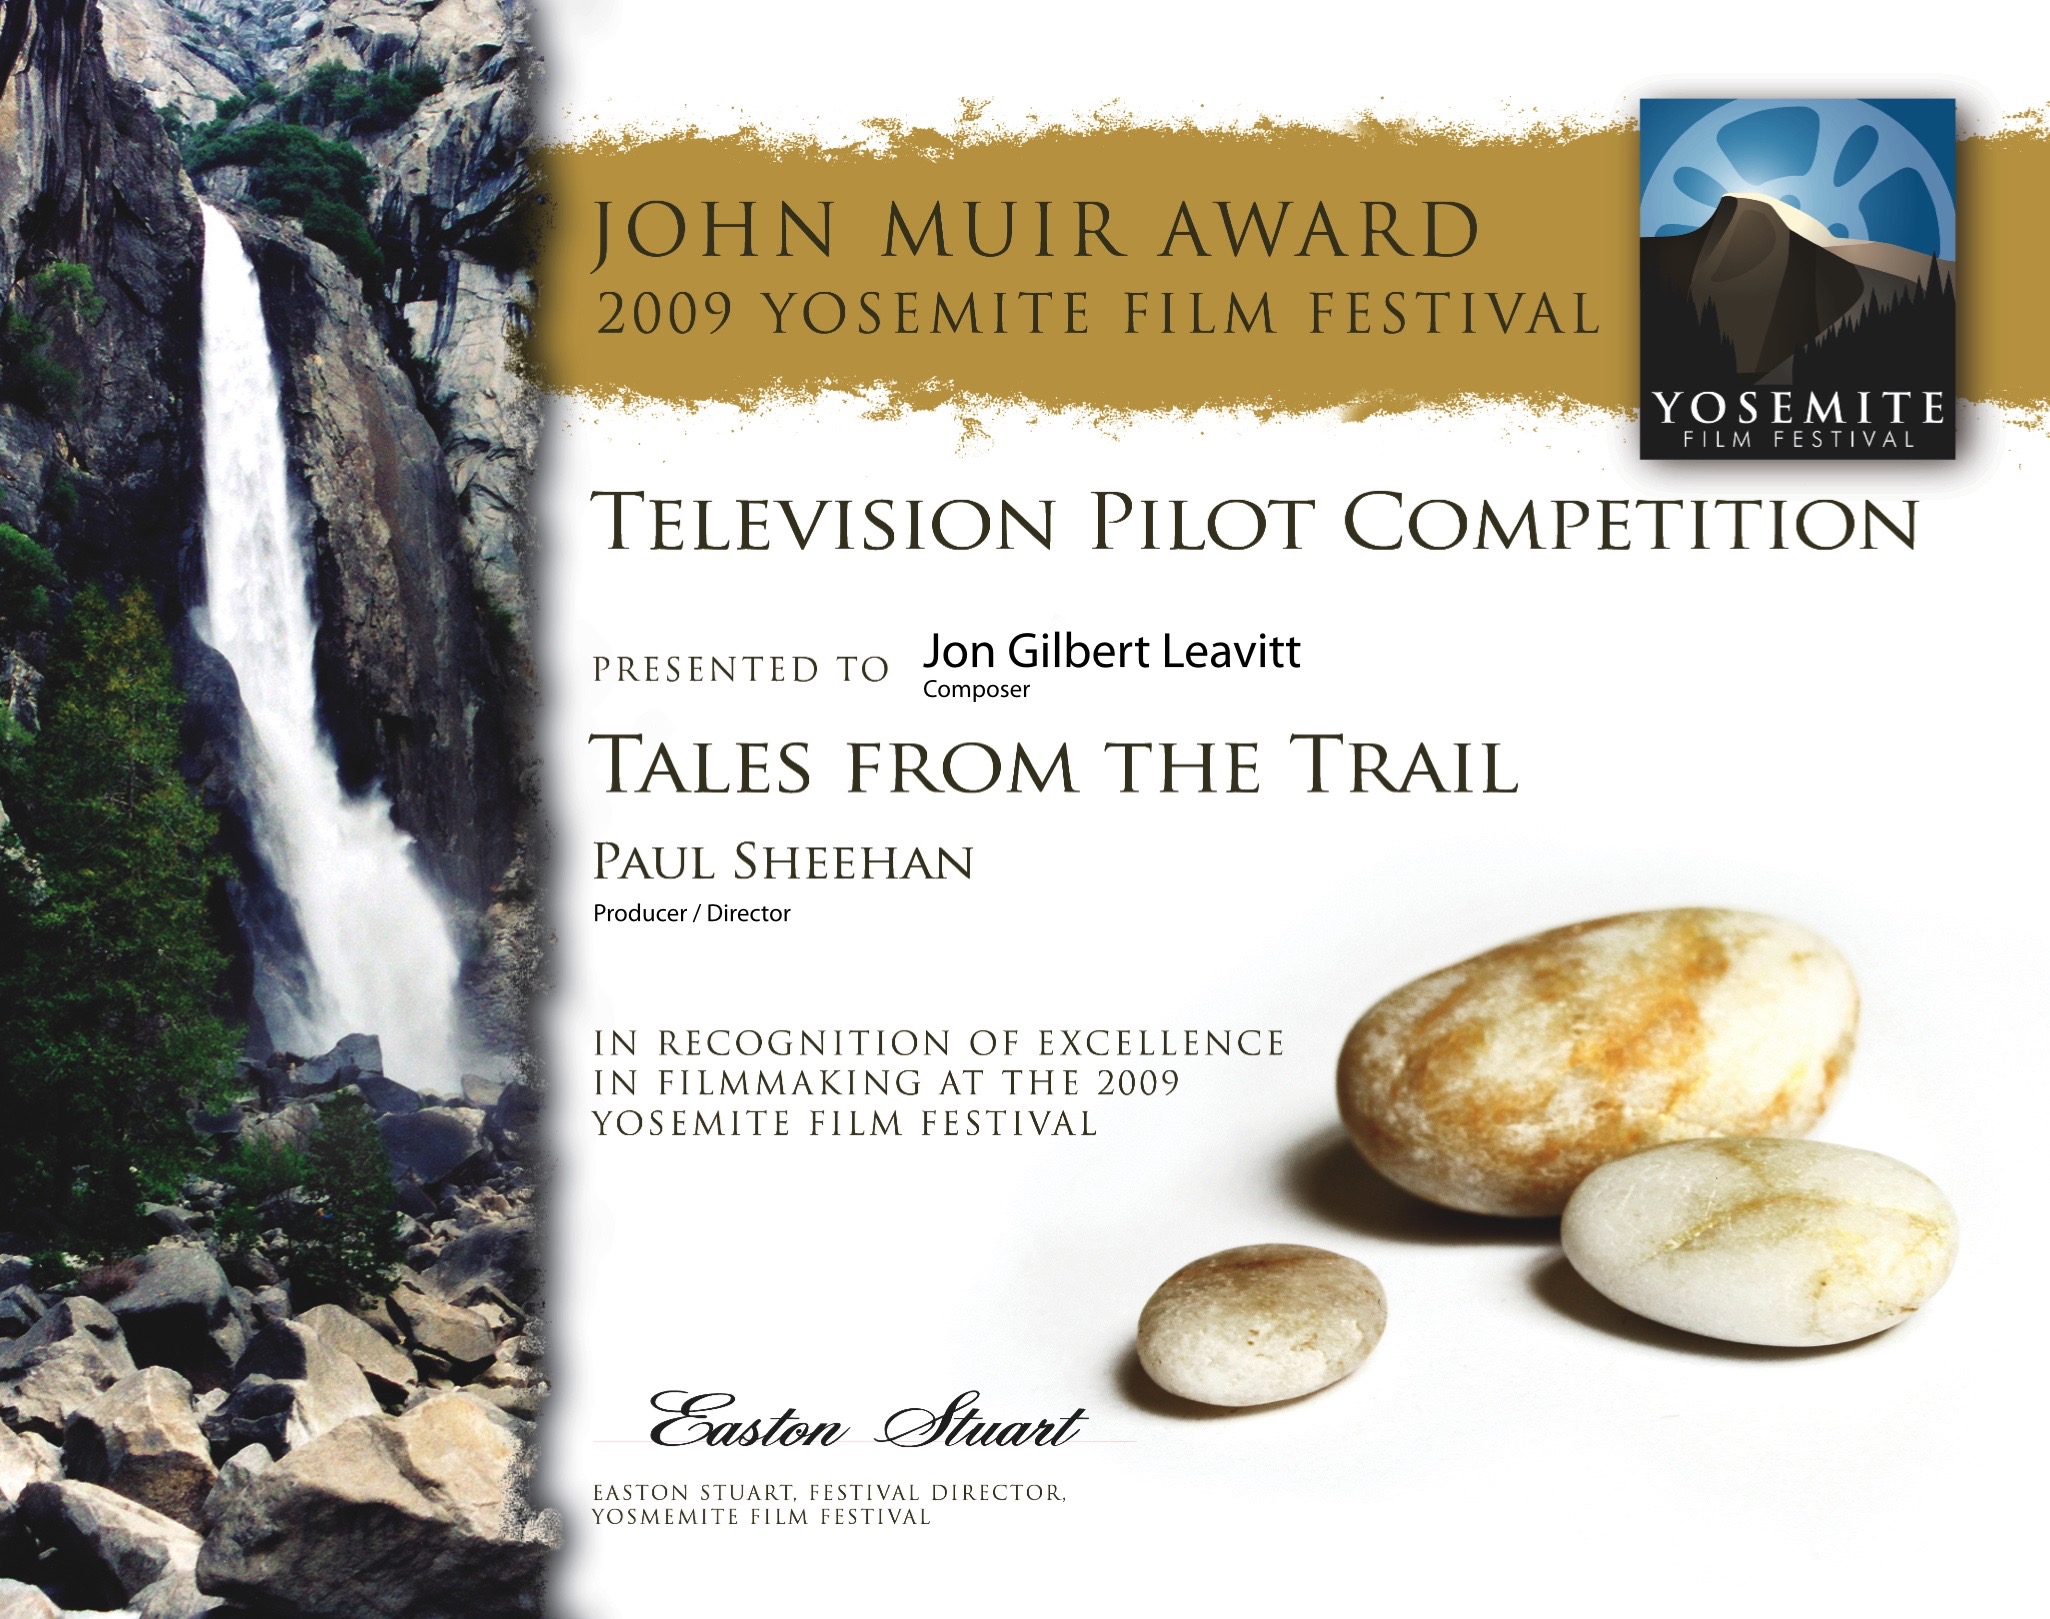 John Muir Award for music composition for the television series 